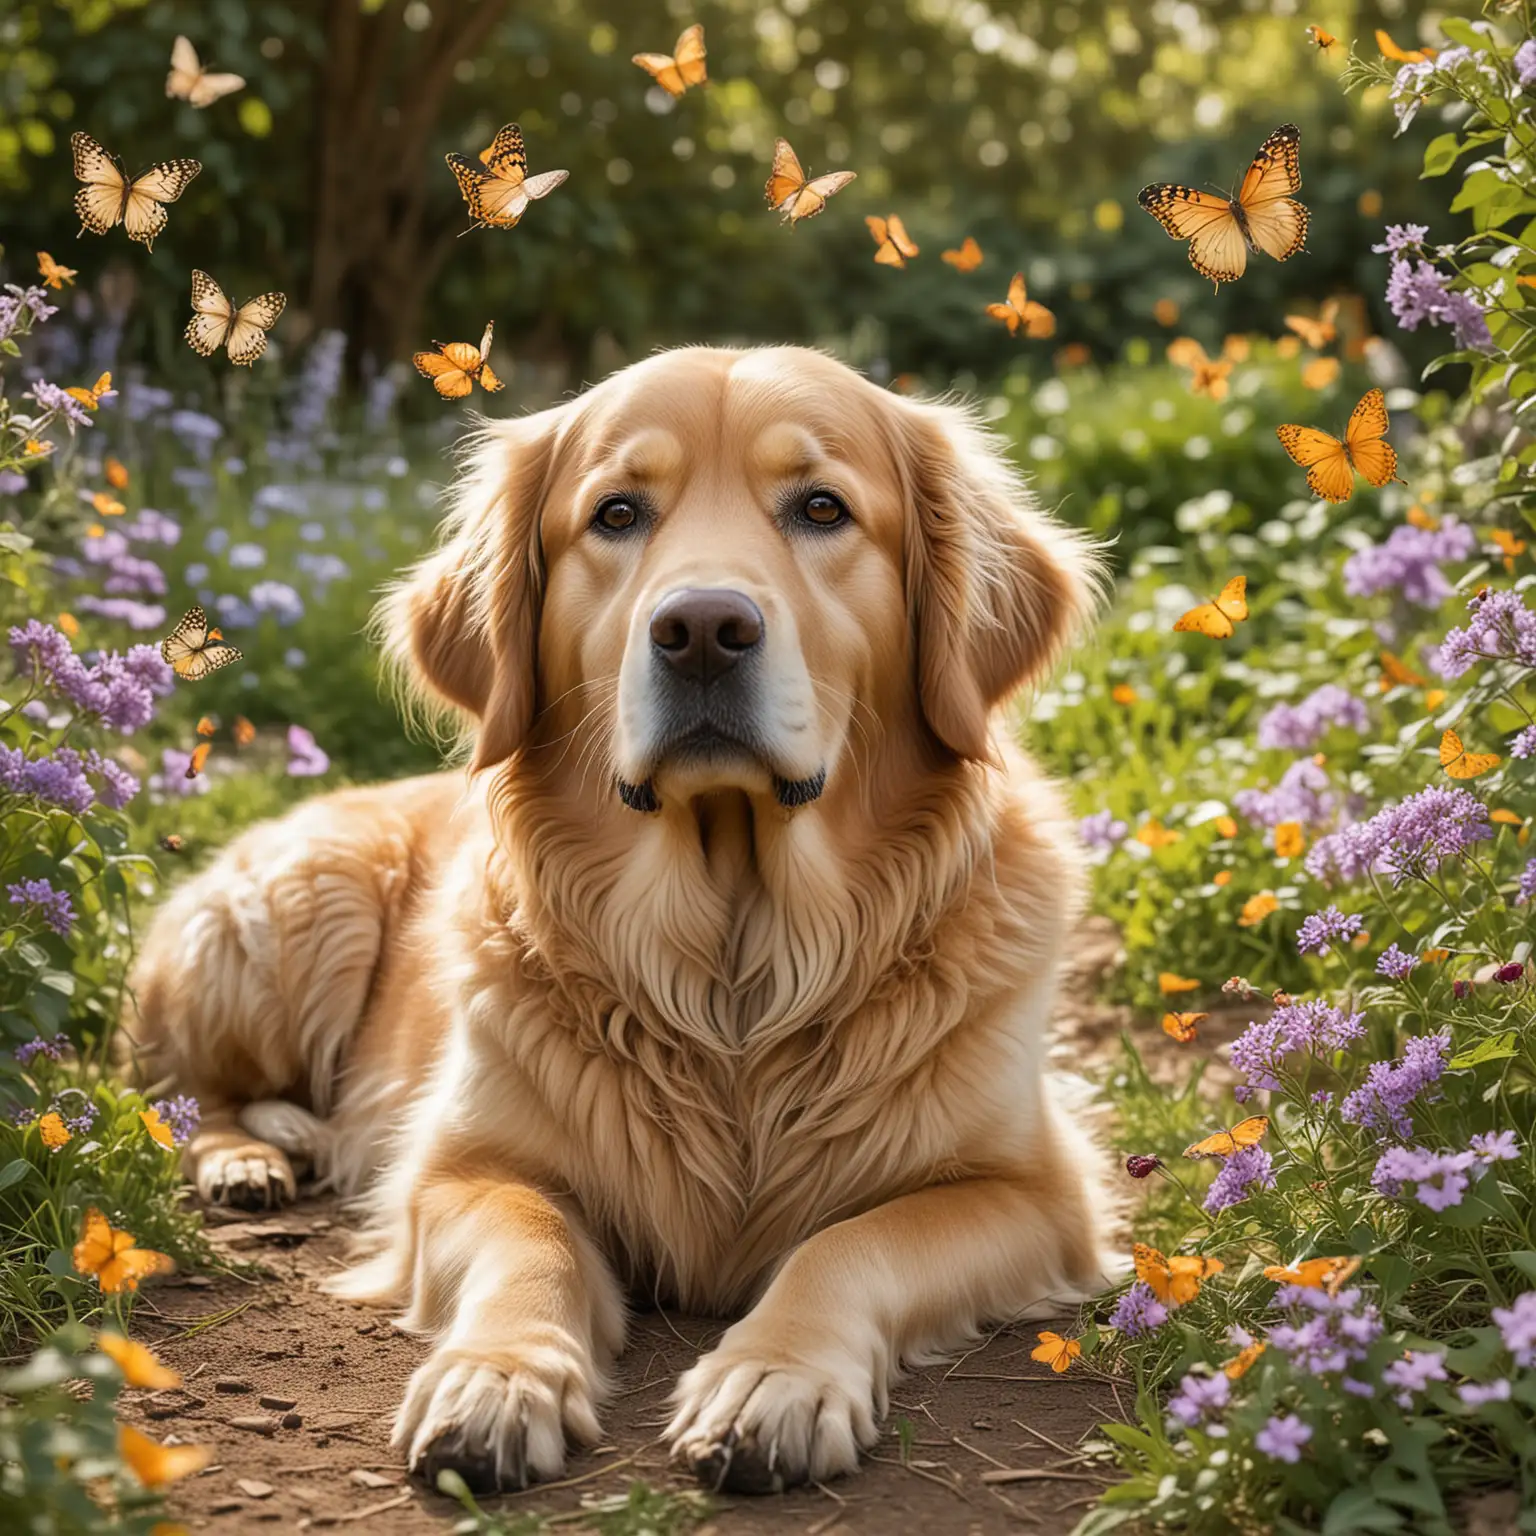 Golden Retriever Relaxing in a Sunny Park Amid Fluttering Butterflies and Blooming Flowers